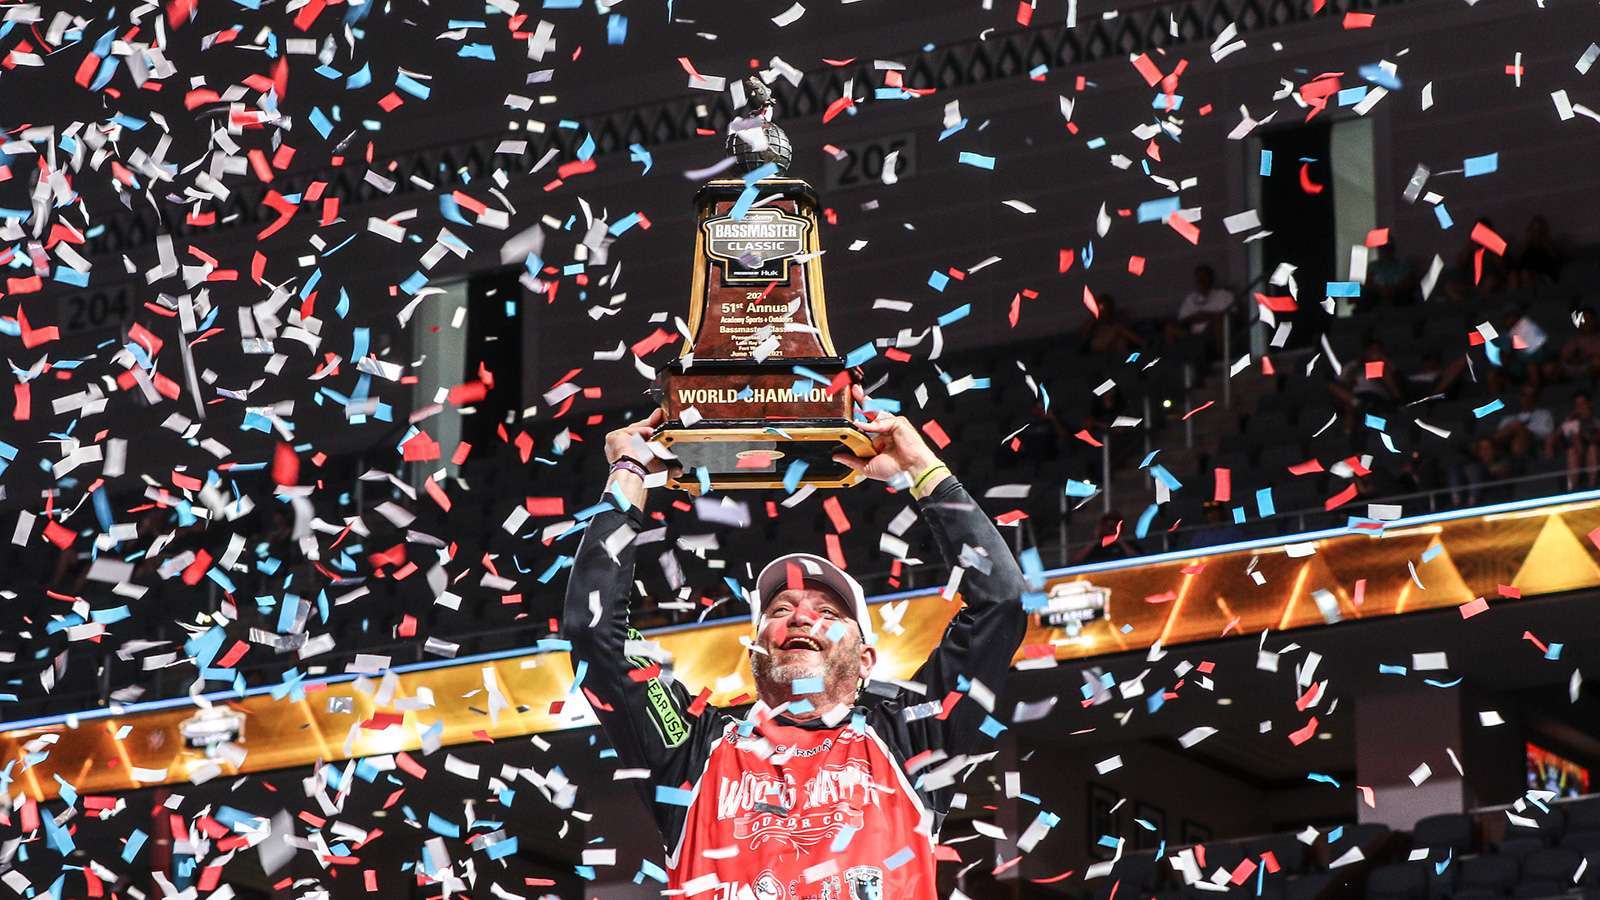 Cherry is only the fourth repeat champion in 51 Classics and the seventh angler to win more than one title. Cherry doubled up on $300,000 checks in a span of one year, three months and five days, and with it claimed legendary status in bass fishing.